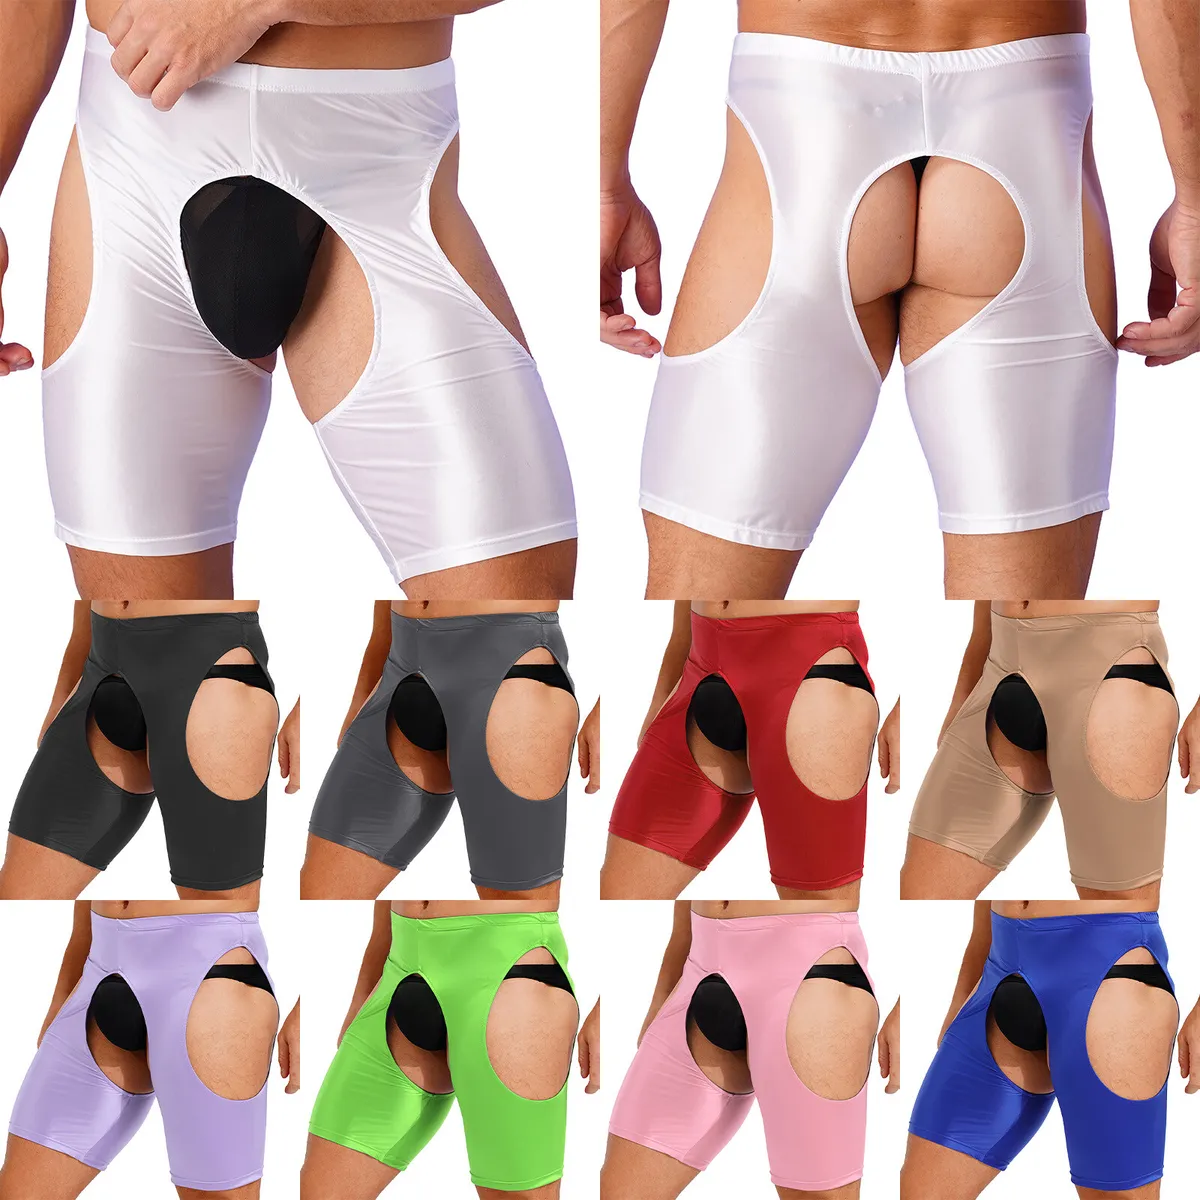 angie fong add photo mens crotchless shorts